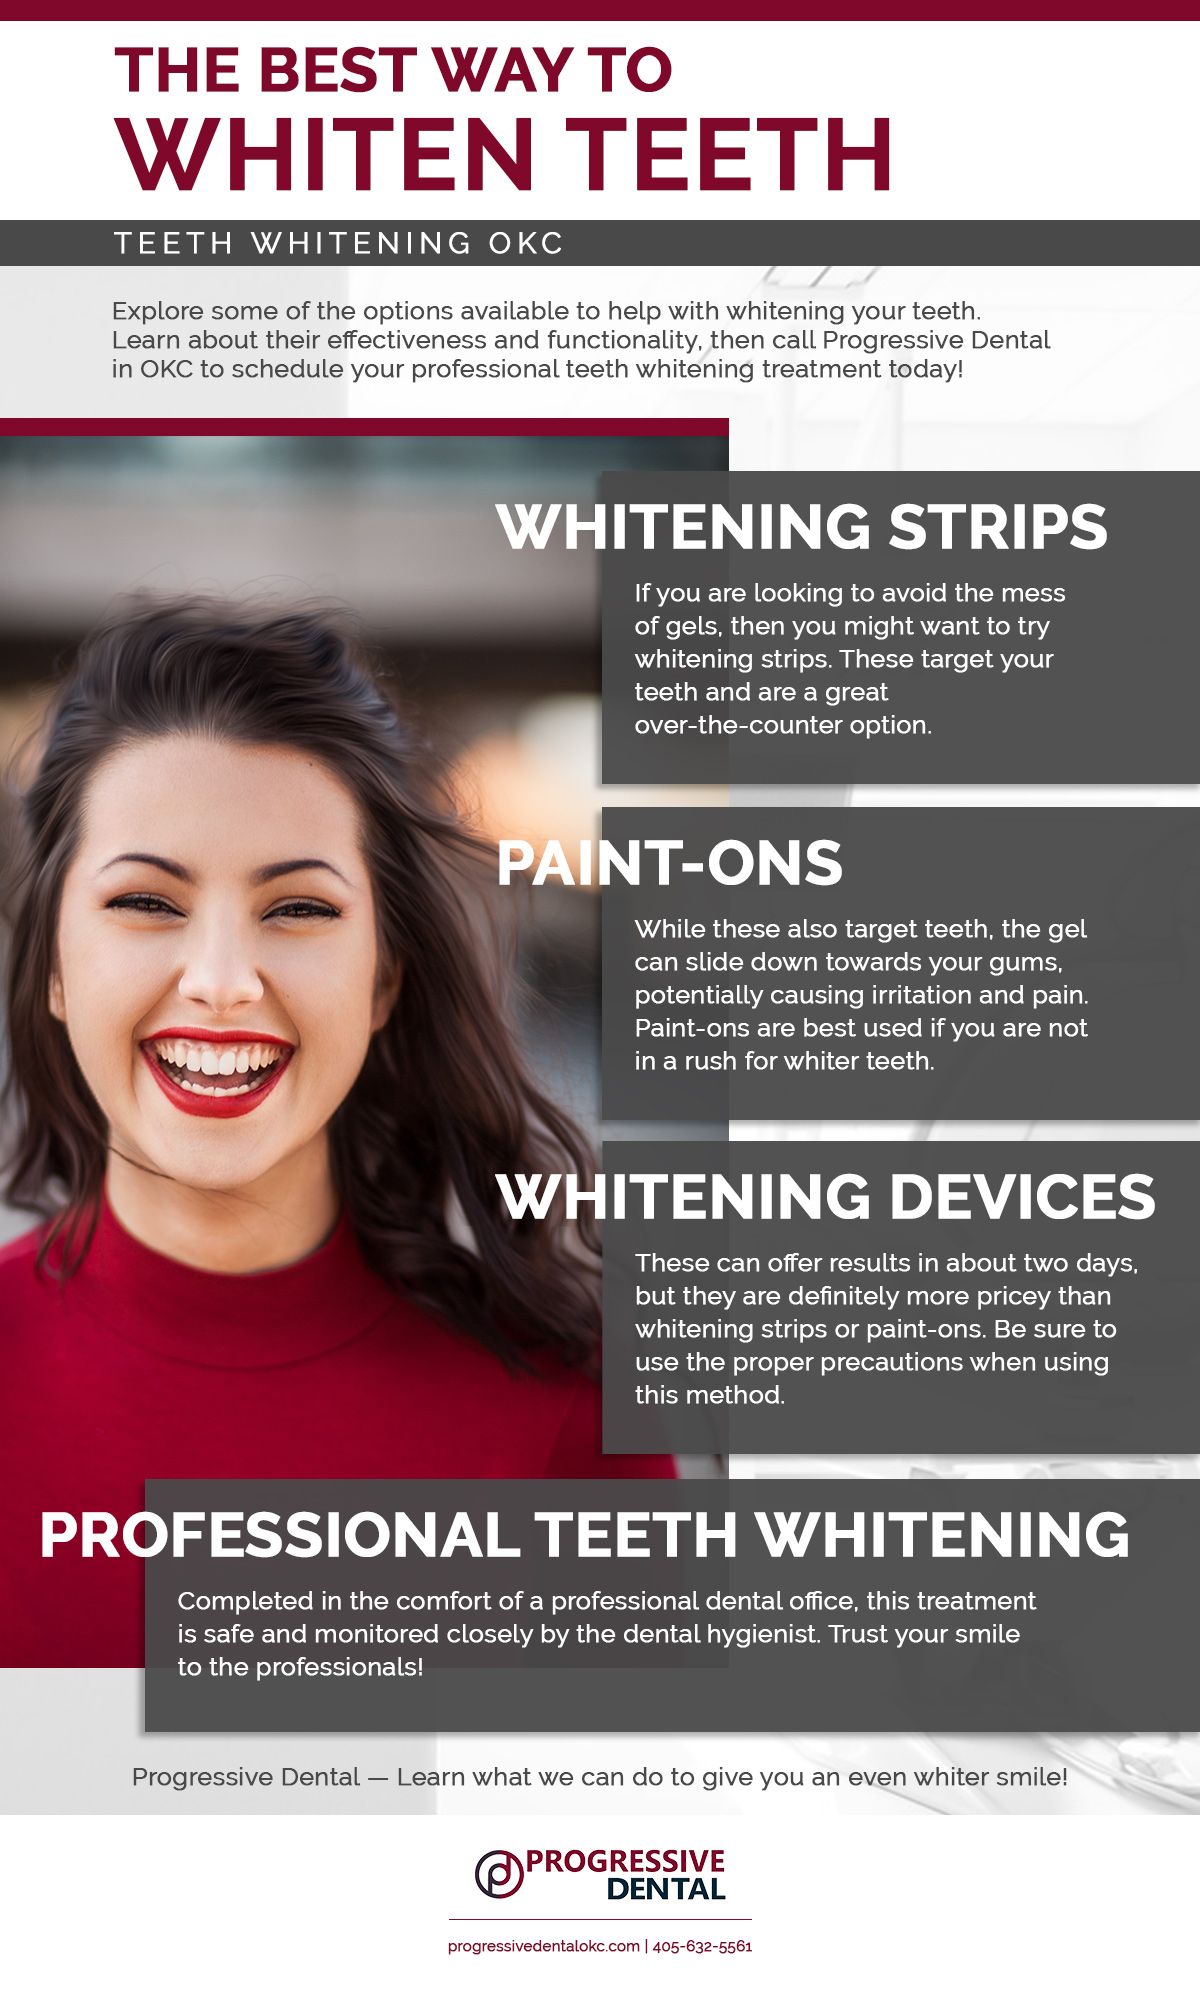 A Teeth Whitening Infographic